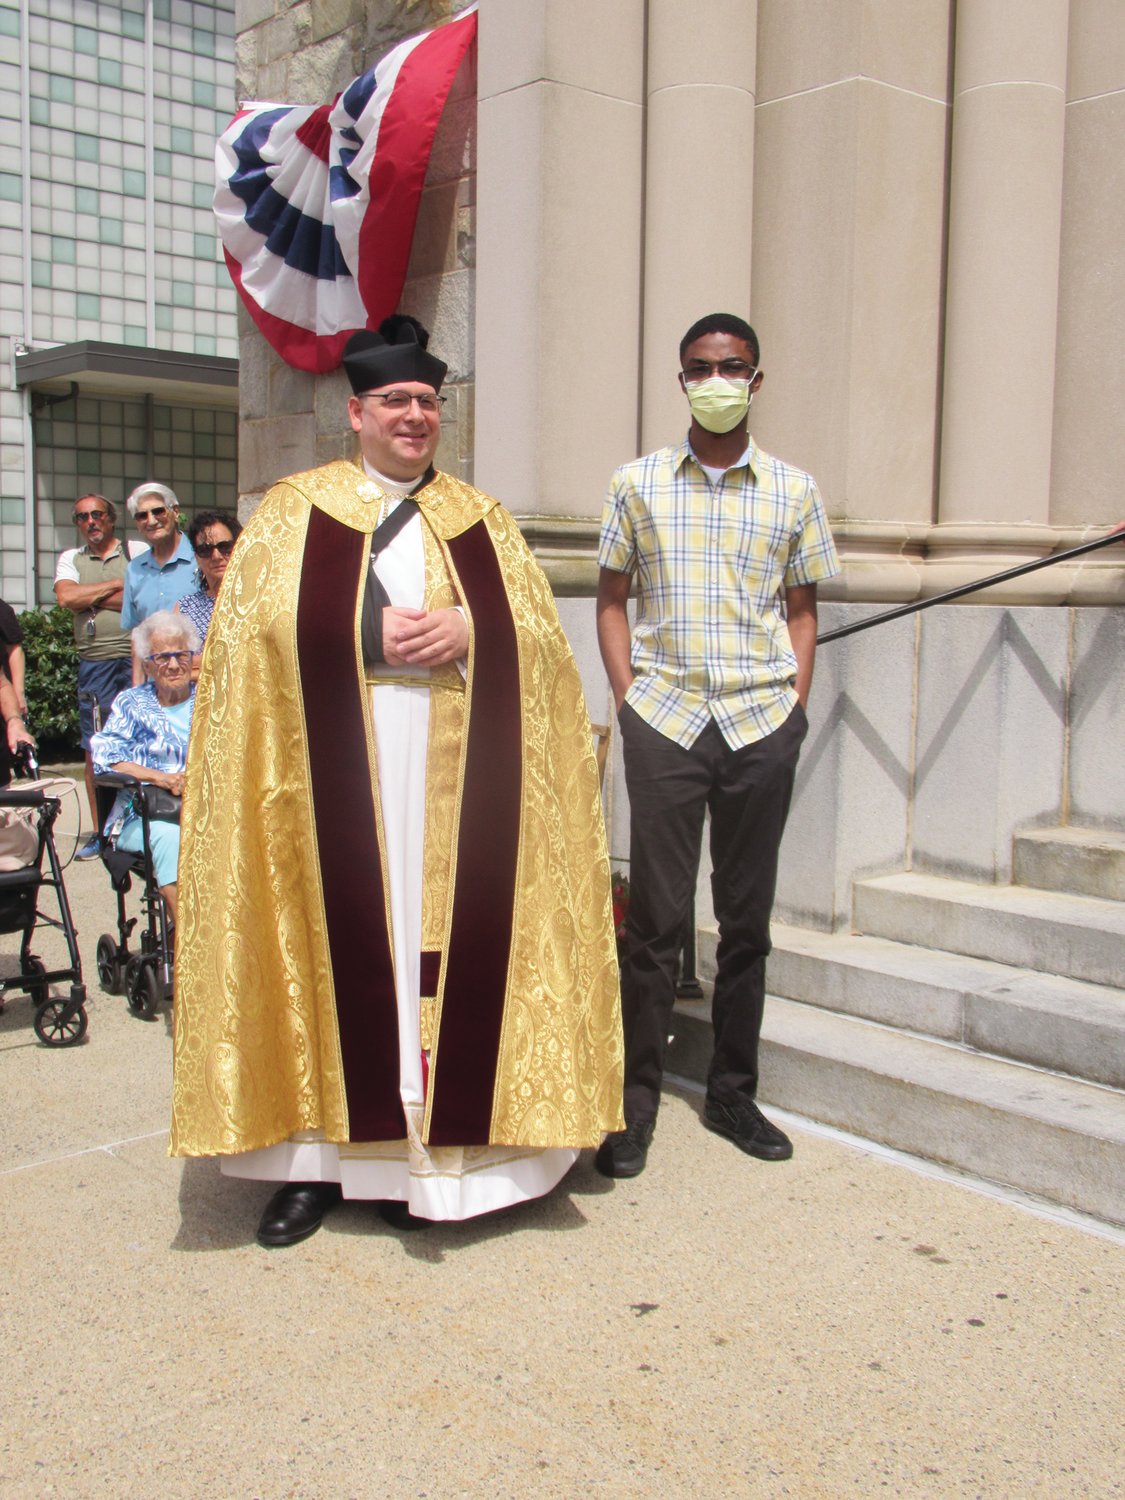 POPULAR PASTOR: Rev. Angelo N. Carusi is joined by a Saint Rocco’s parishioner prior to Sunday’s annual feast and festival procession.